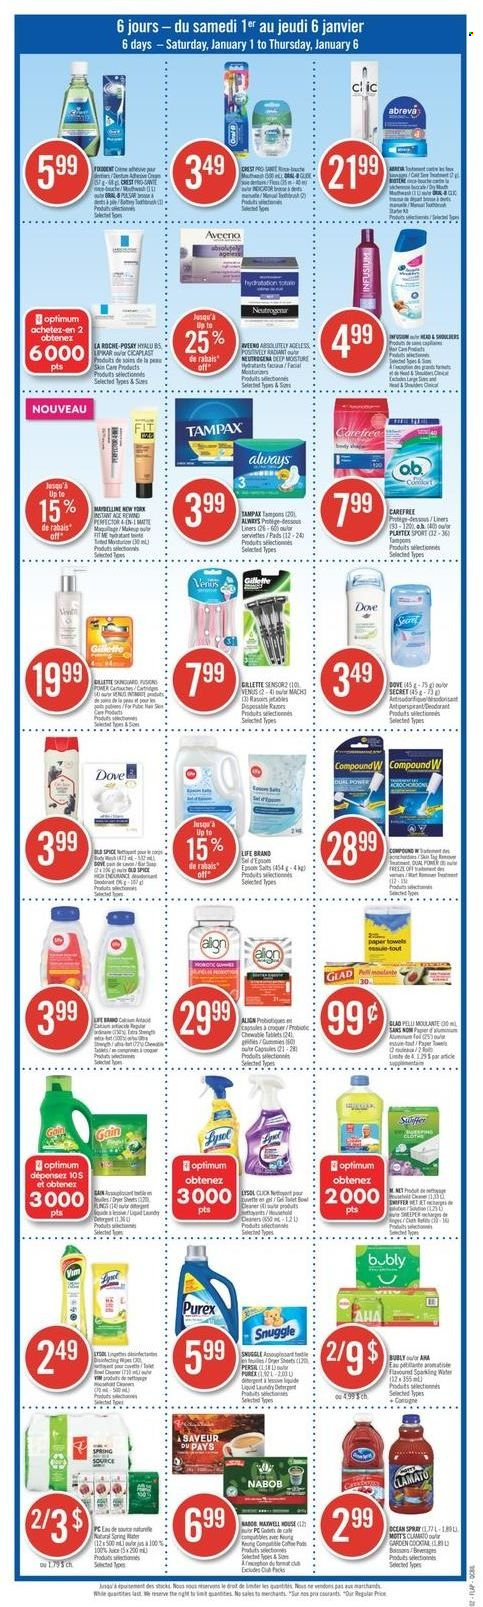 thumbnail - Pharmaprix Flyer - January 01, 2022 - January 06, 2022 - Sales products - pants, Aveeno, kitchen towels, paper towels, Gain, Snuggle, Persil, Purex, Carefree, tampons, Abreva, La Roche-Posay, pen, Dove, Gillette, Neutrogena, Tampax. Page 14.